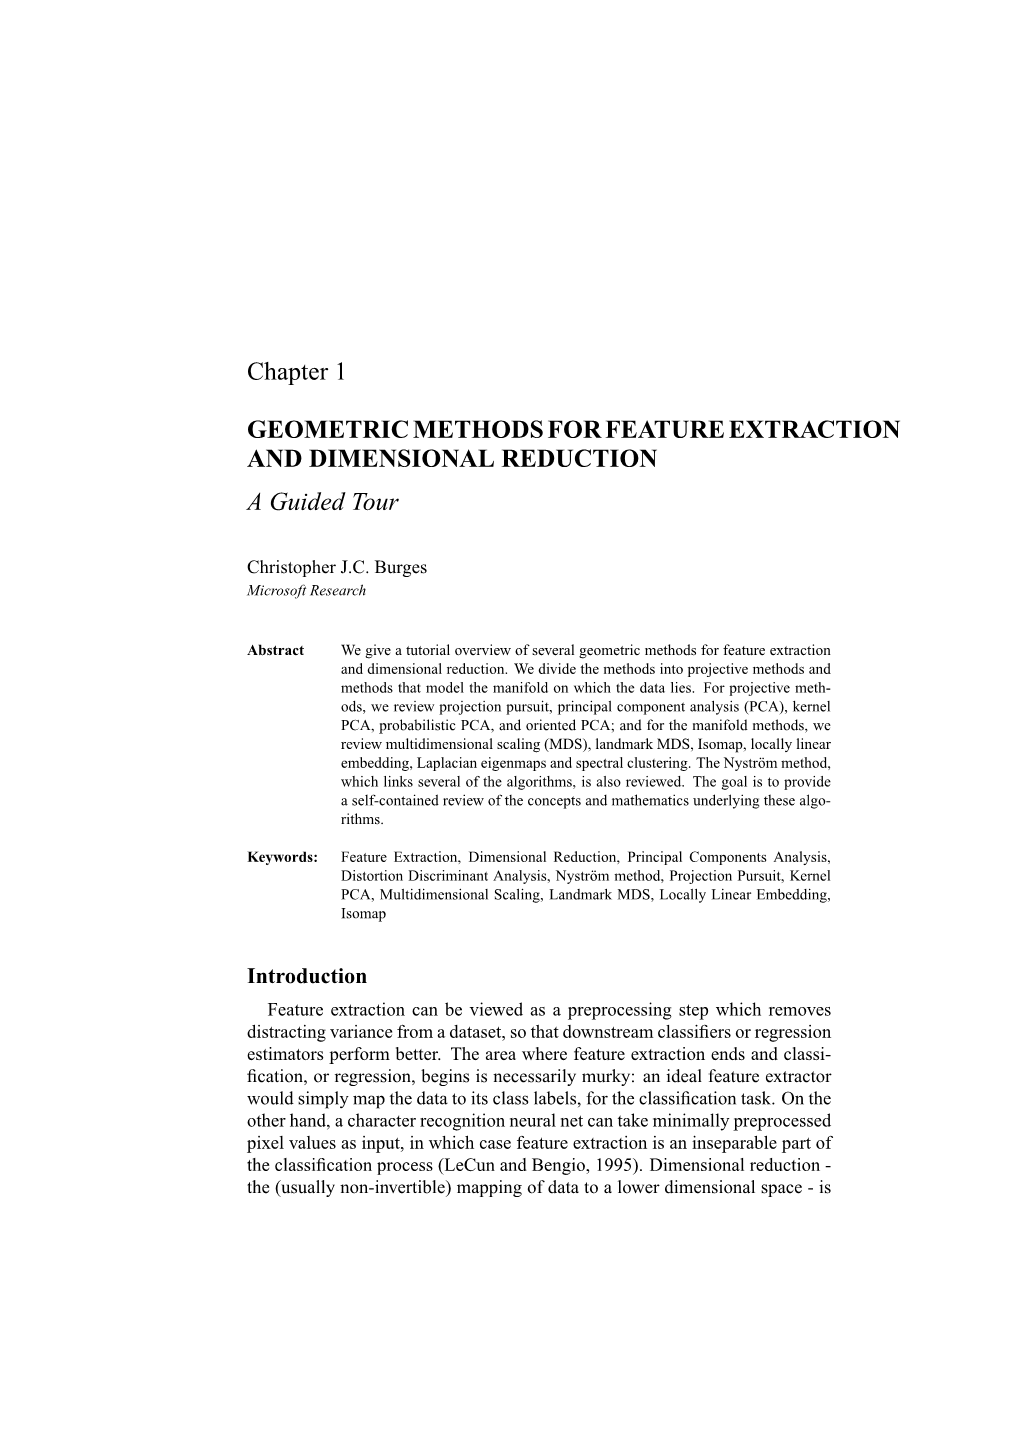 Chapter 1 GEOMETRIC METHODS for FEATURE EXTRACTION and DIMENSIONAL REDUCTION a Guided Tour